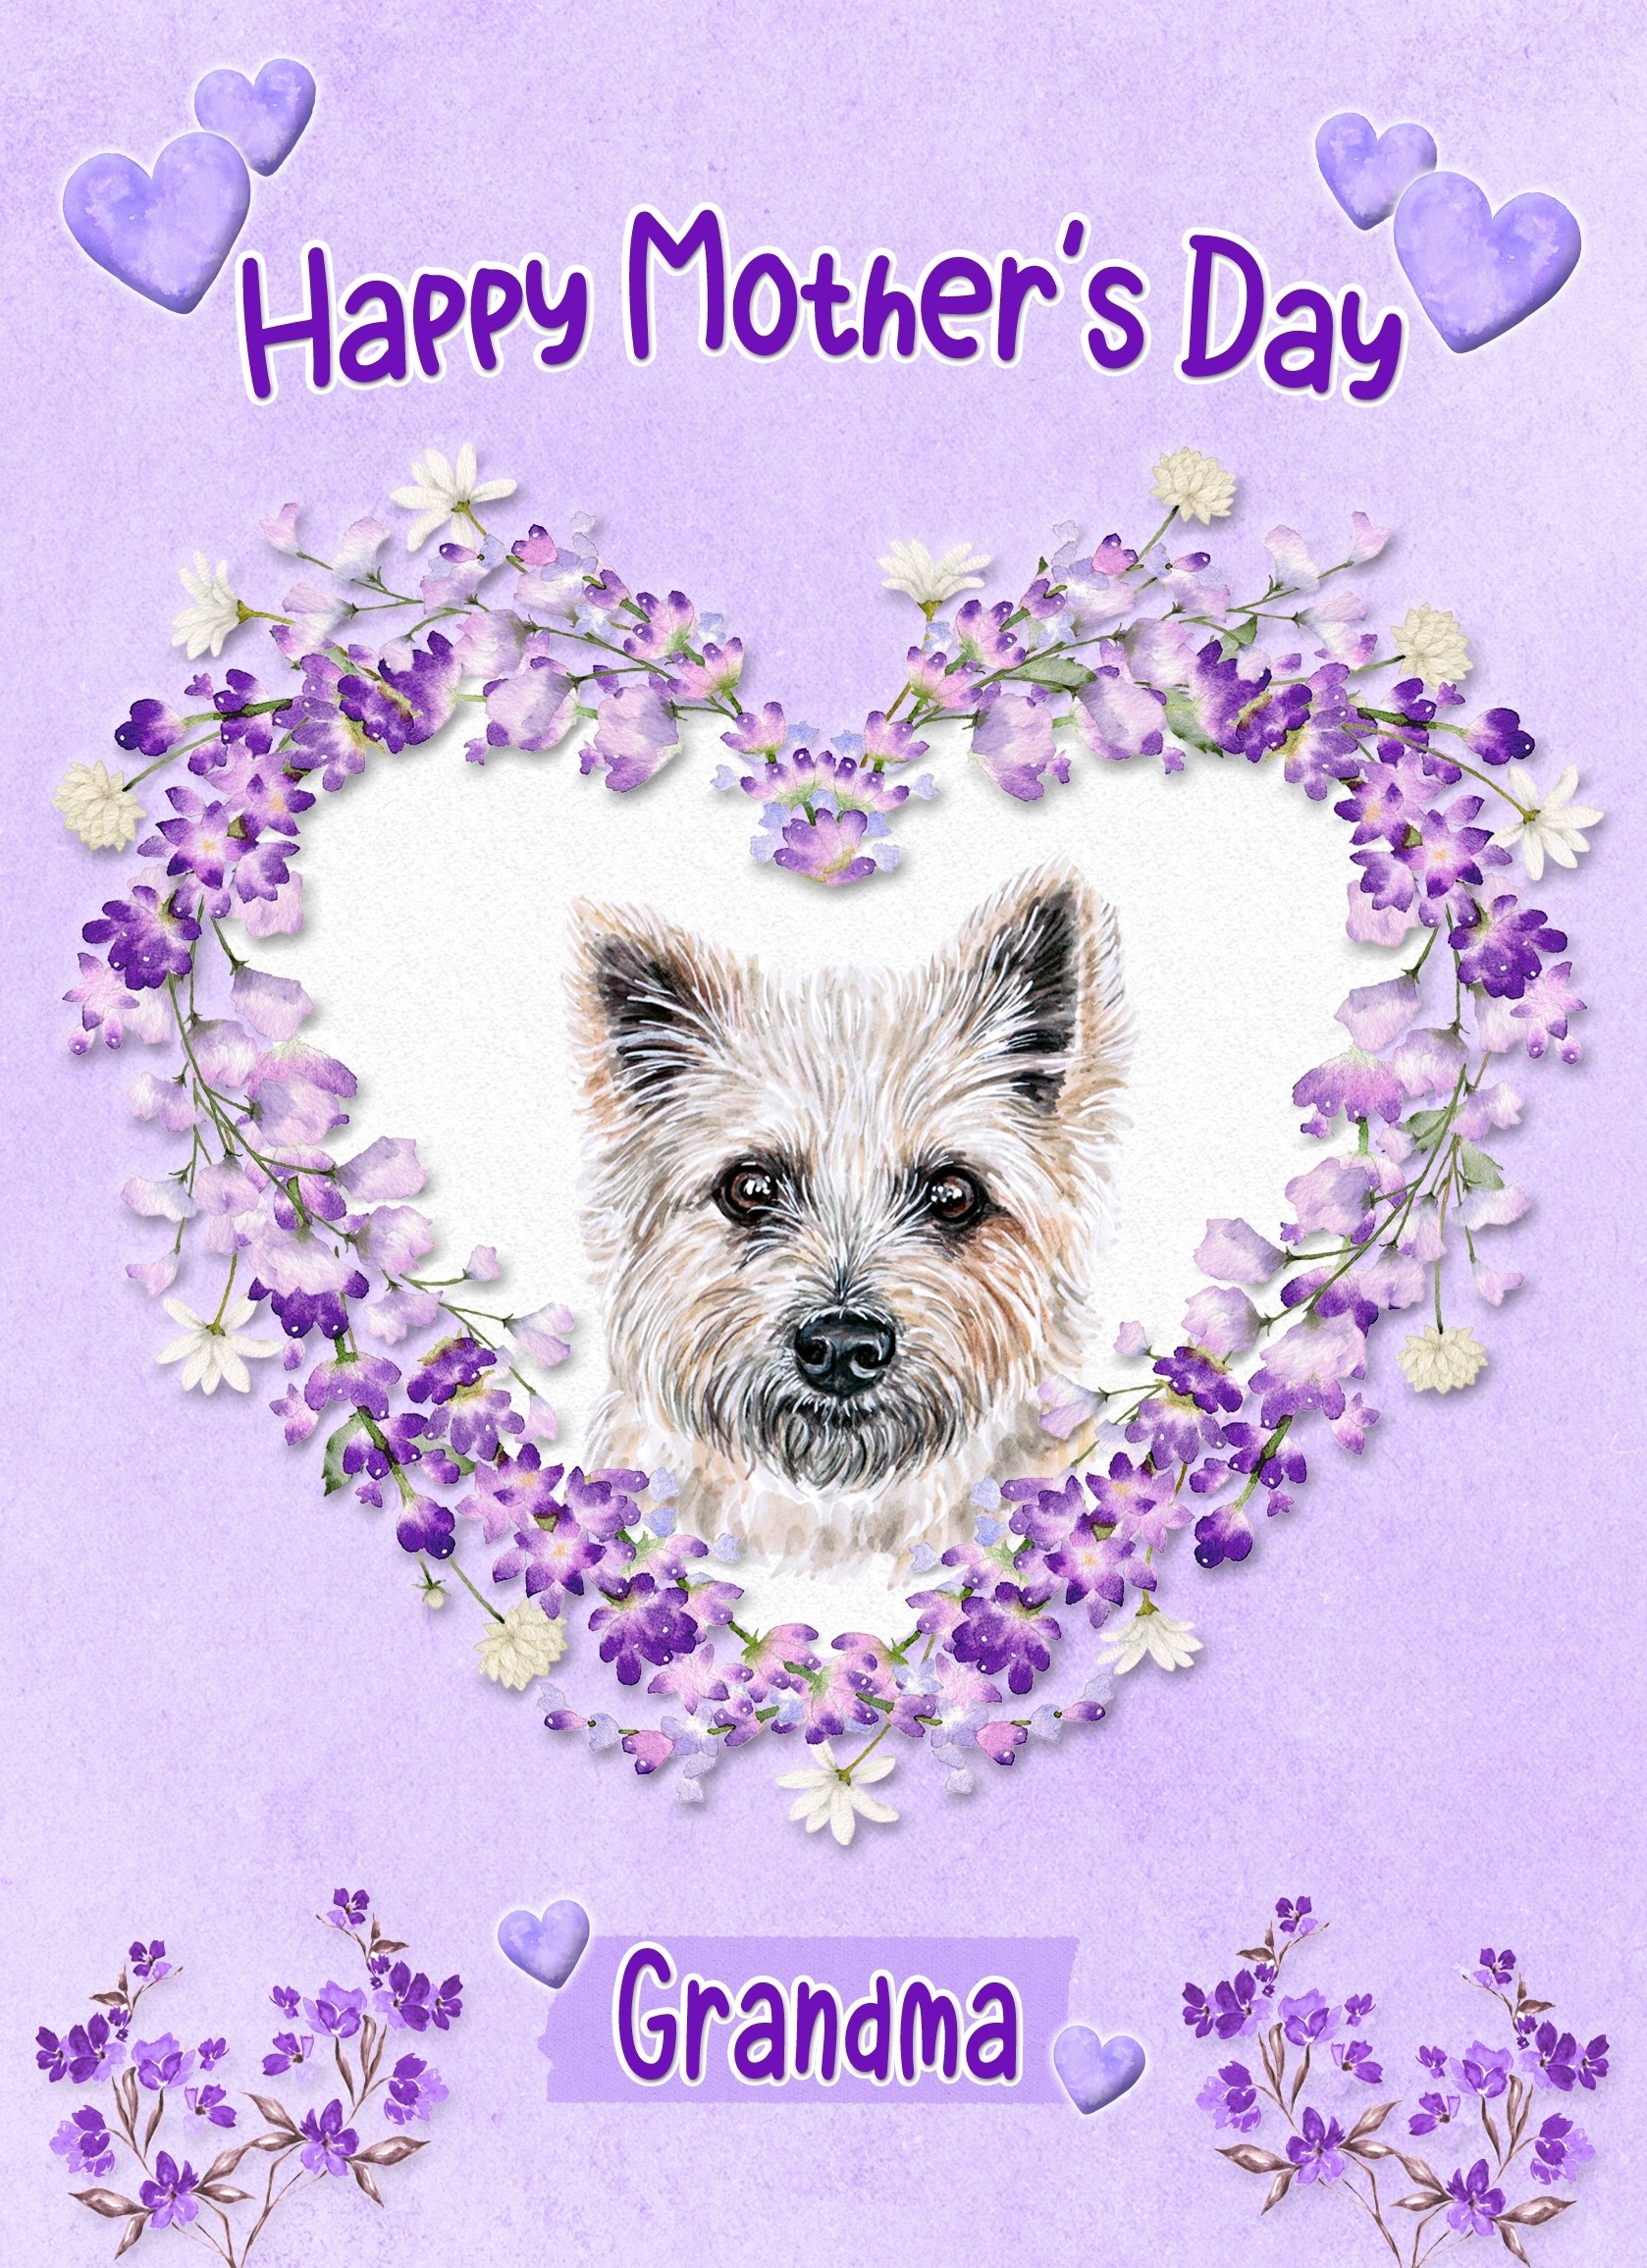 Cairn Terrier Dog Mothers Day Card (Happy Mothers, Grandma)